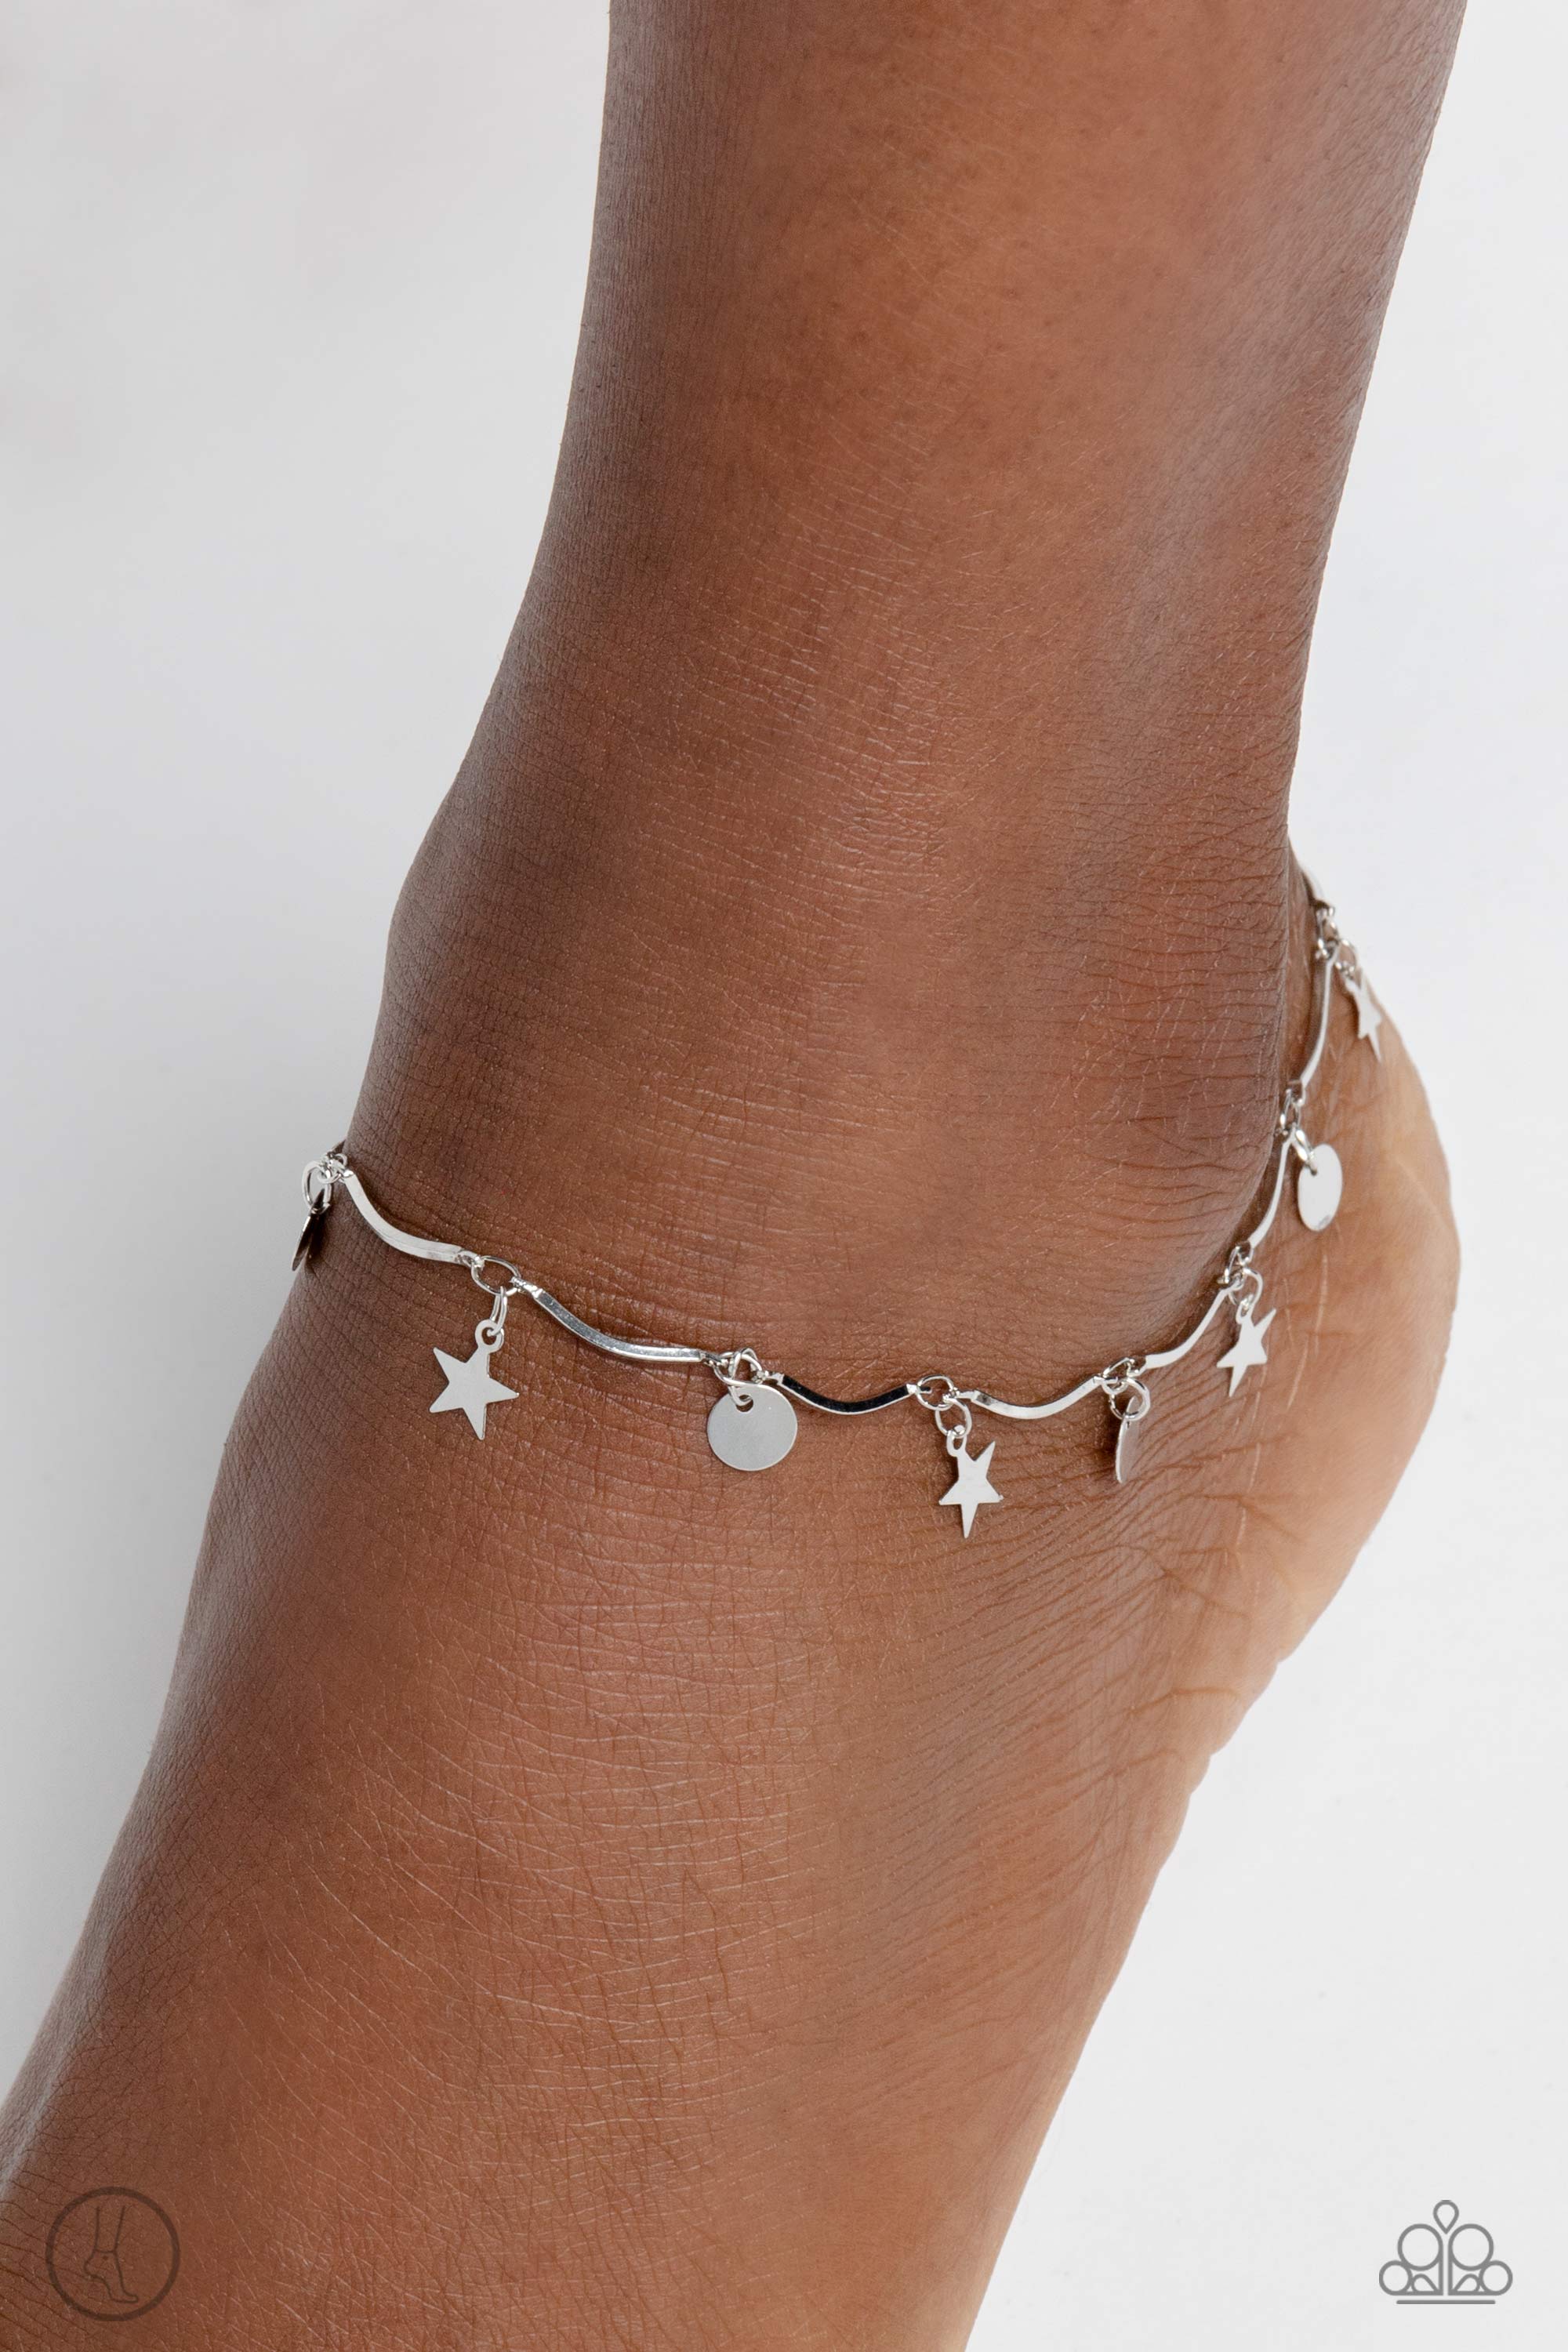 BEACH You To It Silver Anklet - Paparazzi Accessories- lightbox - CarasShop.com - $5 Jewelry by Cara Jewels